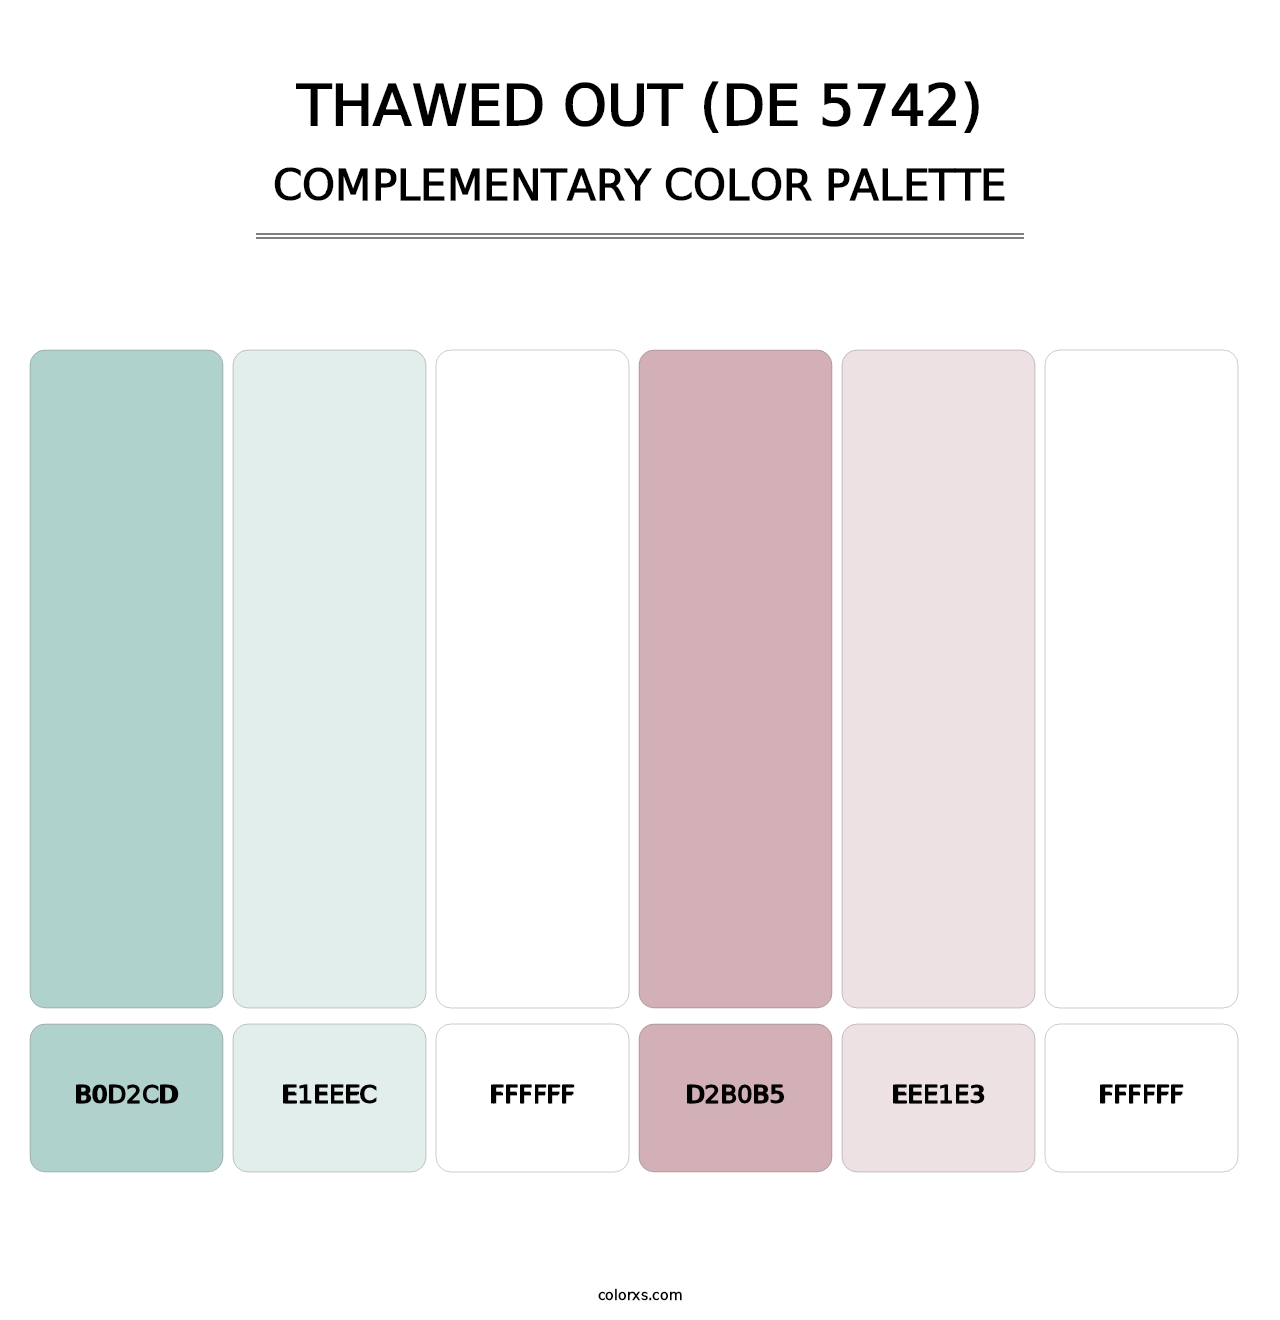 Thawed Out (DE 5742) - Complementary Color Palette